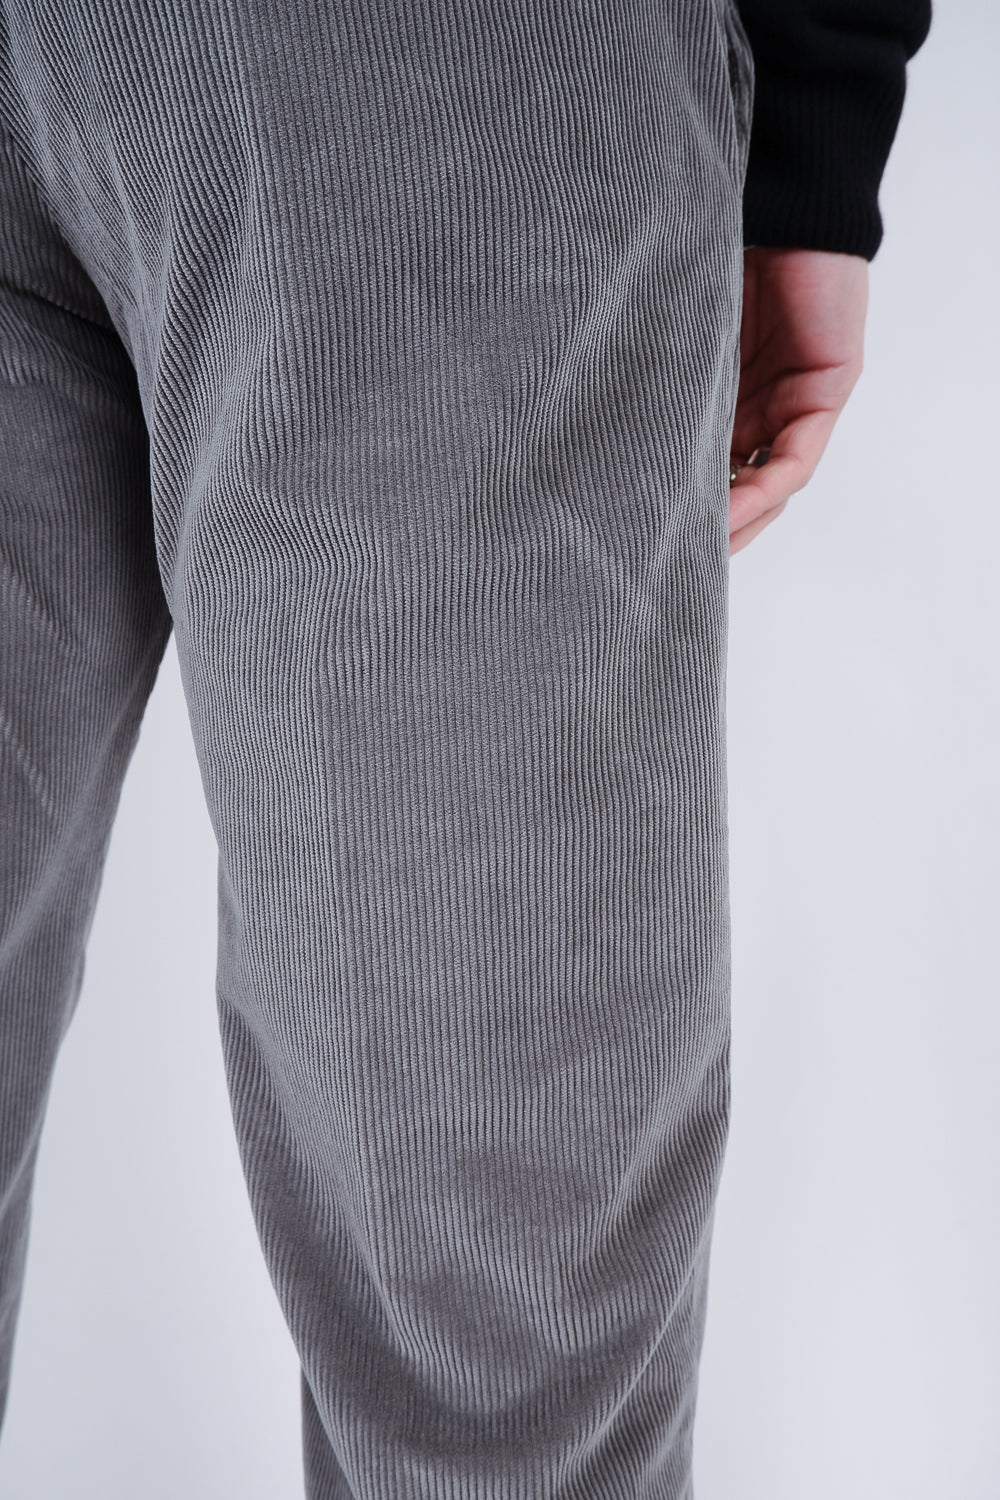 Buy the Briglia Italian Corduroy Trouser in Sage at Intro. Spend £50 for free UK delivery. Official stockists. We ship worldwide.